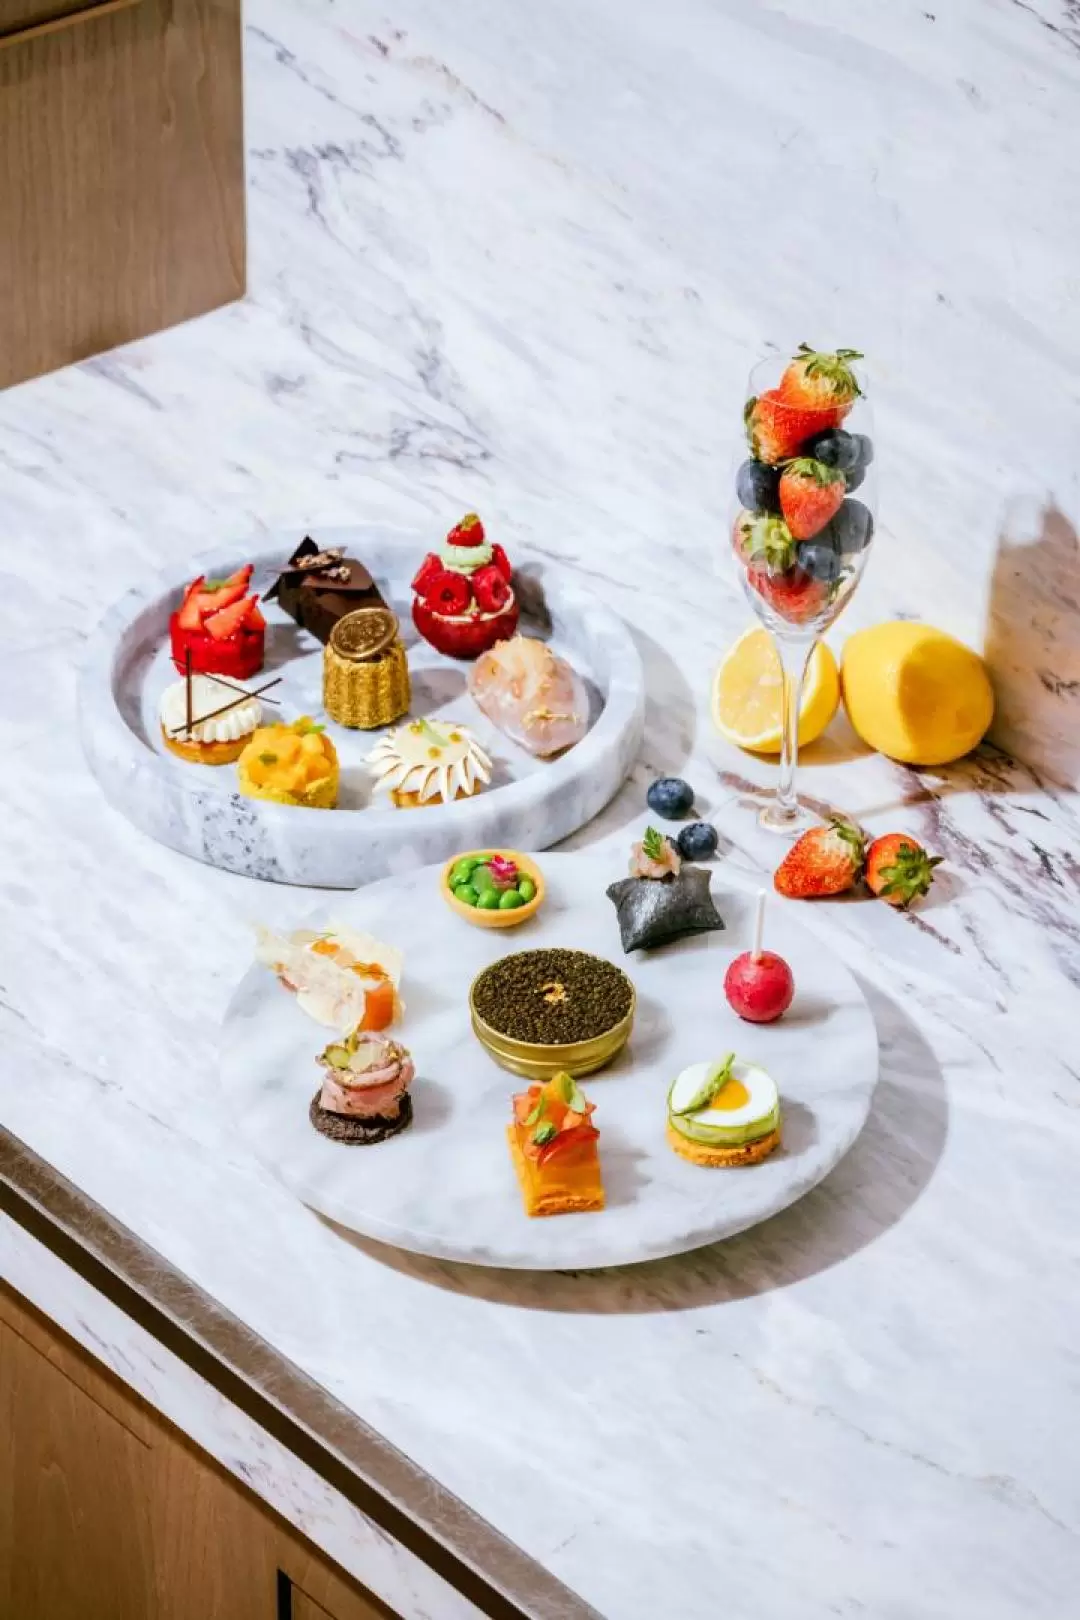 【Up to 10% off】St. Regis Hong Kong | The Drawing Room | Afternoon Tea Set